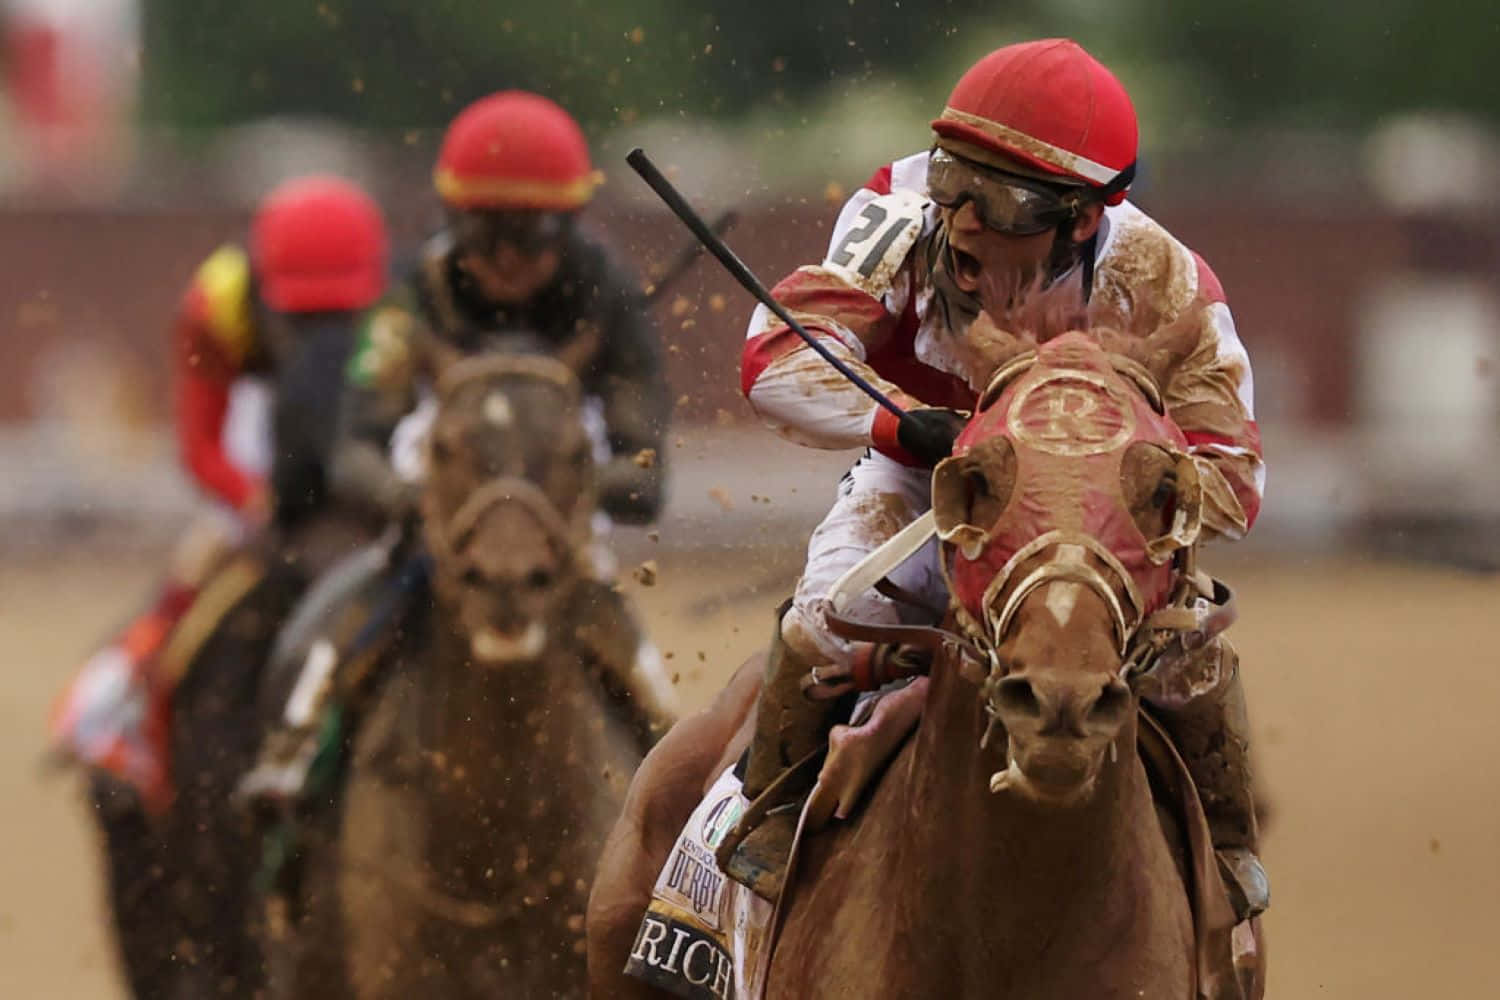 A Jockey Is Riding A Horse On A Dirt Track